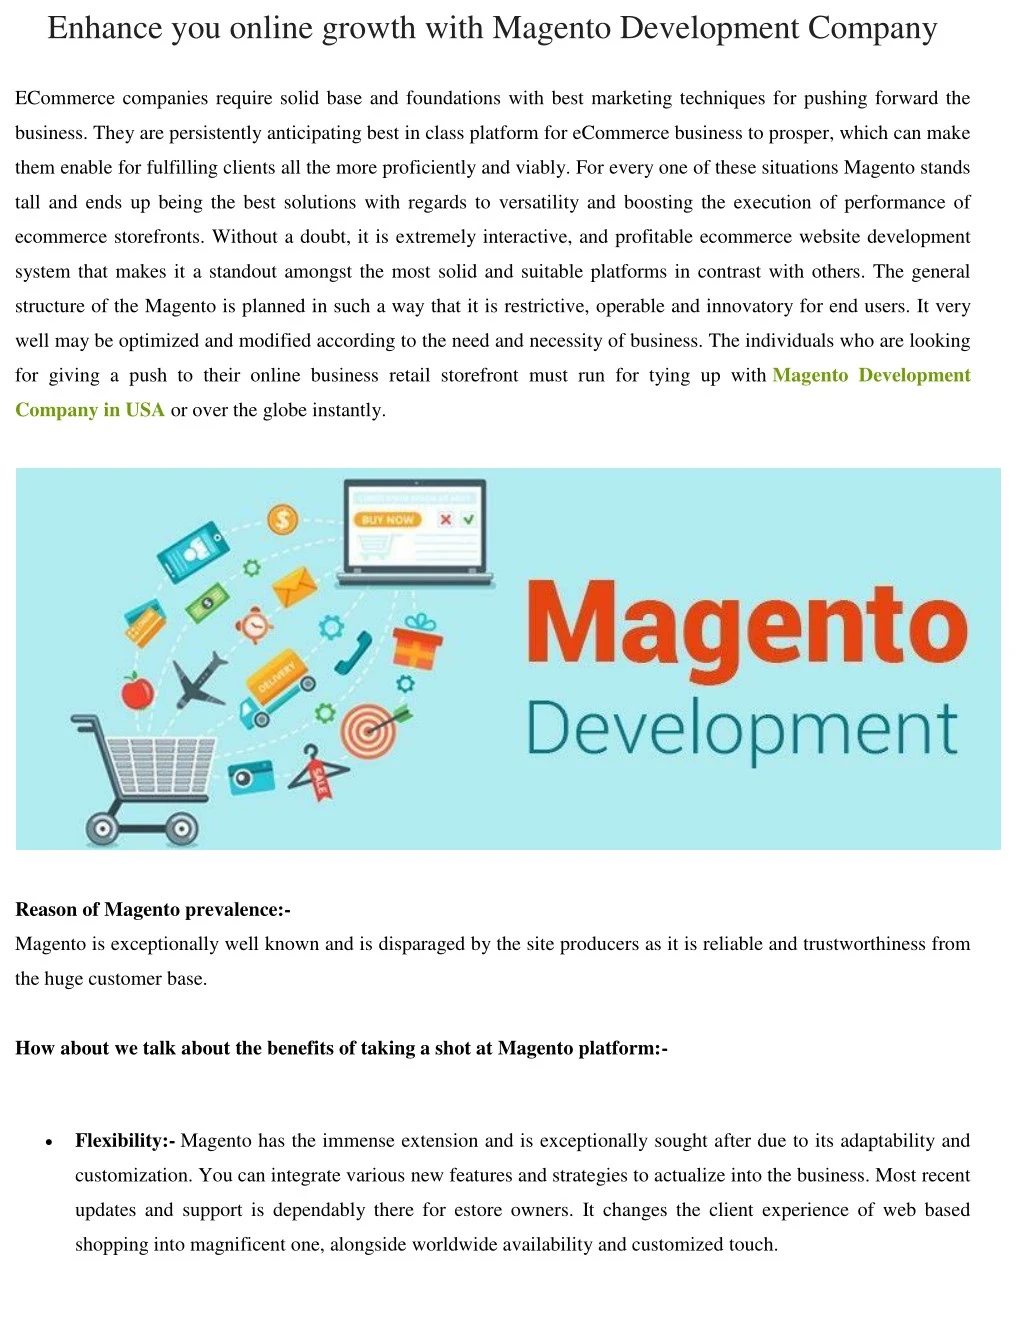 enhance you online growth with magento